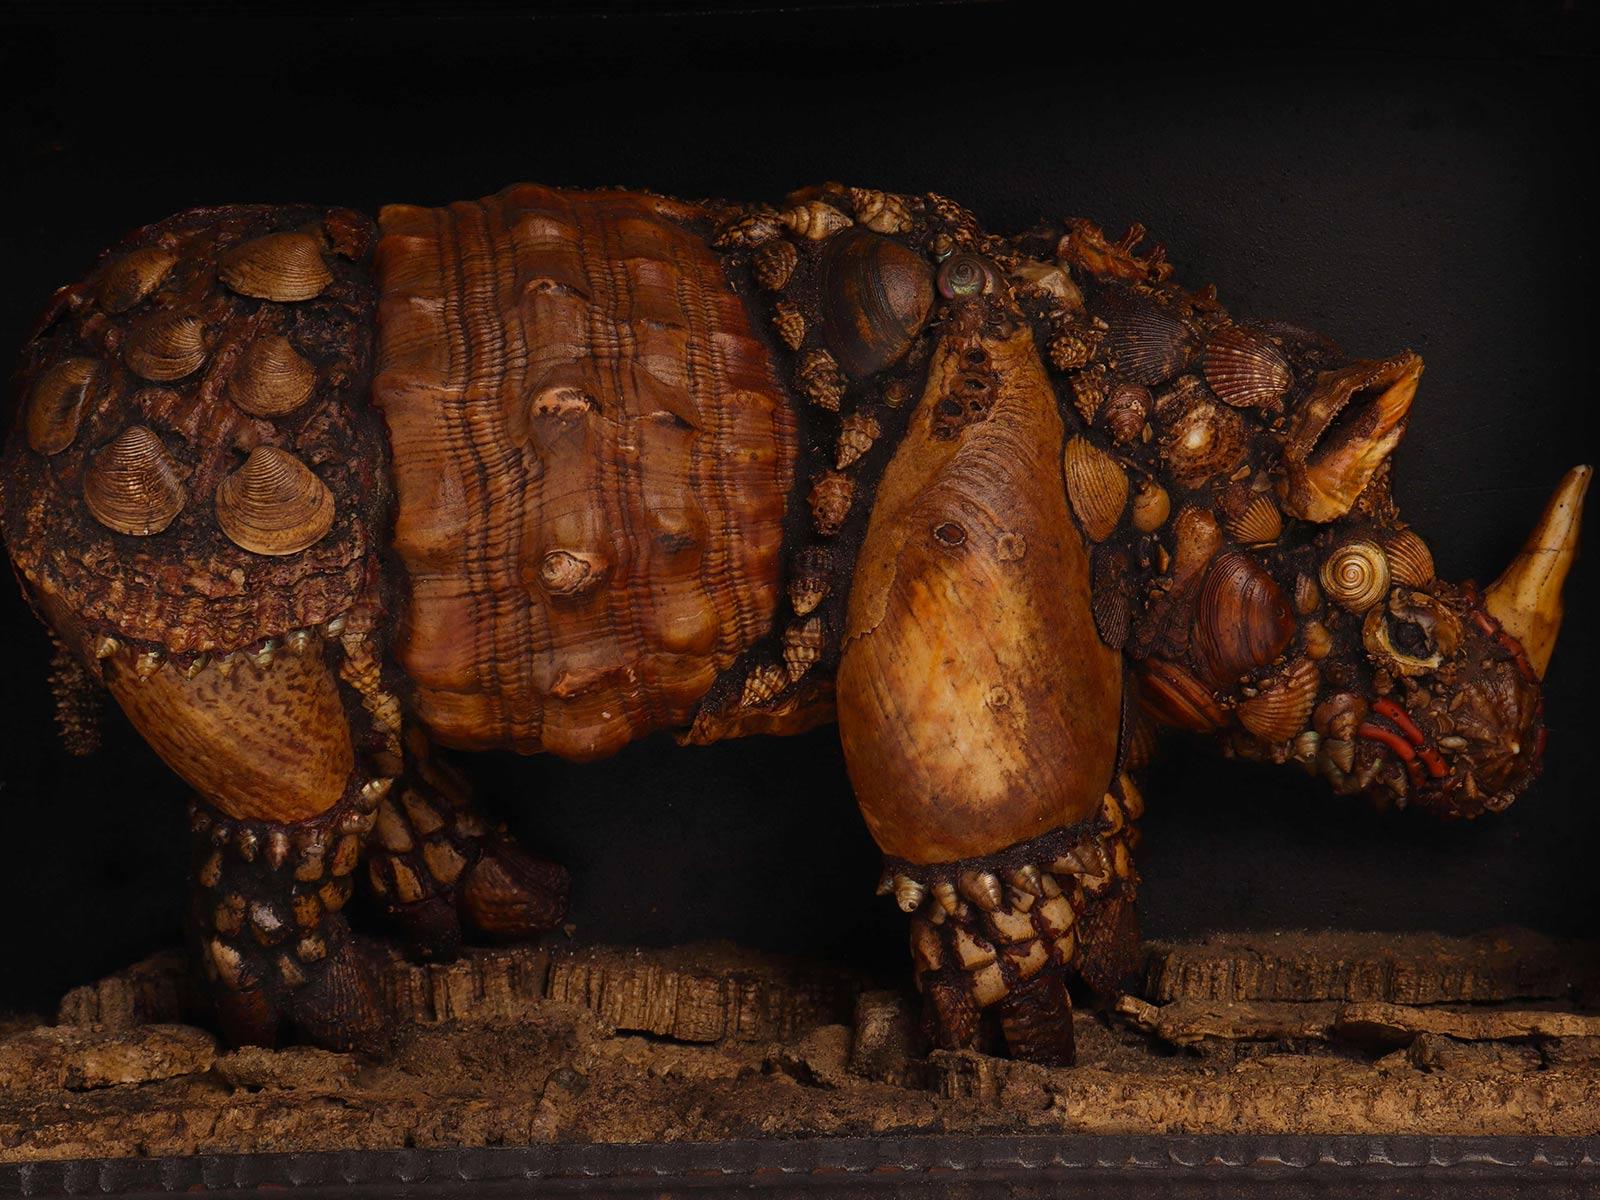 A Wunderkammer natural specimen: the Rhinoceros. A sculpture depicting a rhinoceros, made out of different shells, coral, mother of pearls. The rhinoceros stand on a cork wood. Mounted on black wooden support. The frame is made out of a black